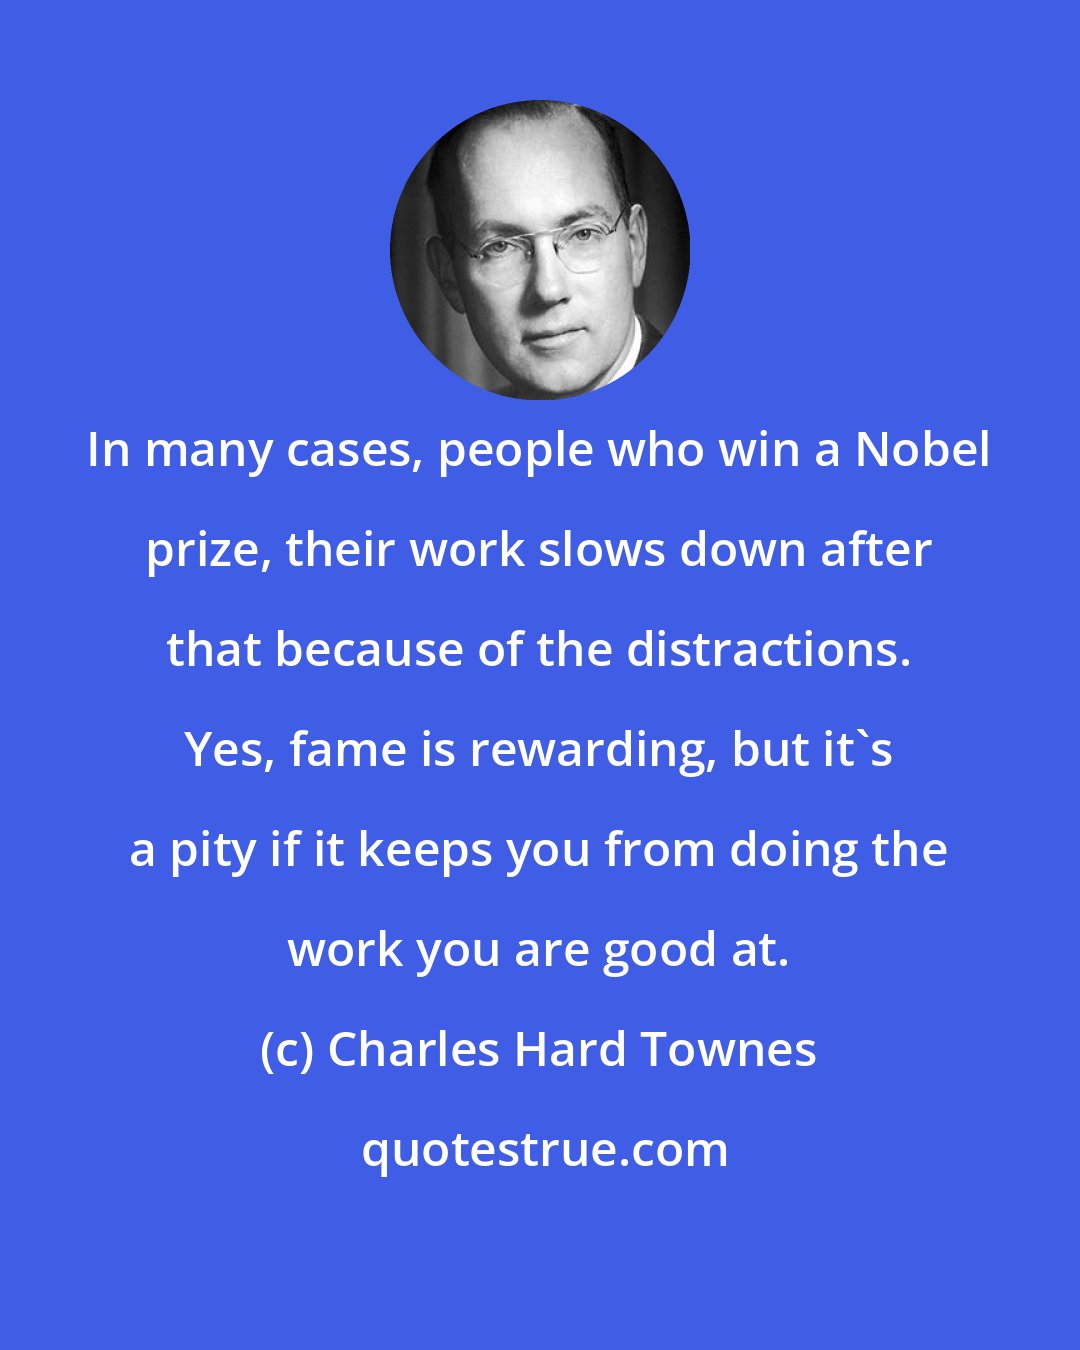 Charles Hard Townes: In many cases, people who win a Nobel prize, their work slows down after that because of the distractions. Yes, fame is rewarding, but it's a pity if it keeps you from doing the work you are good at.